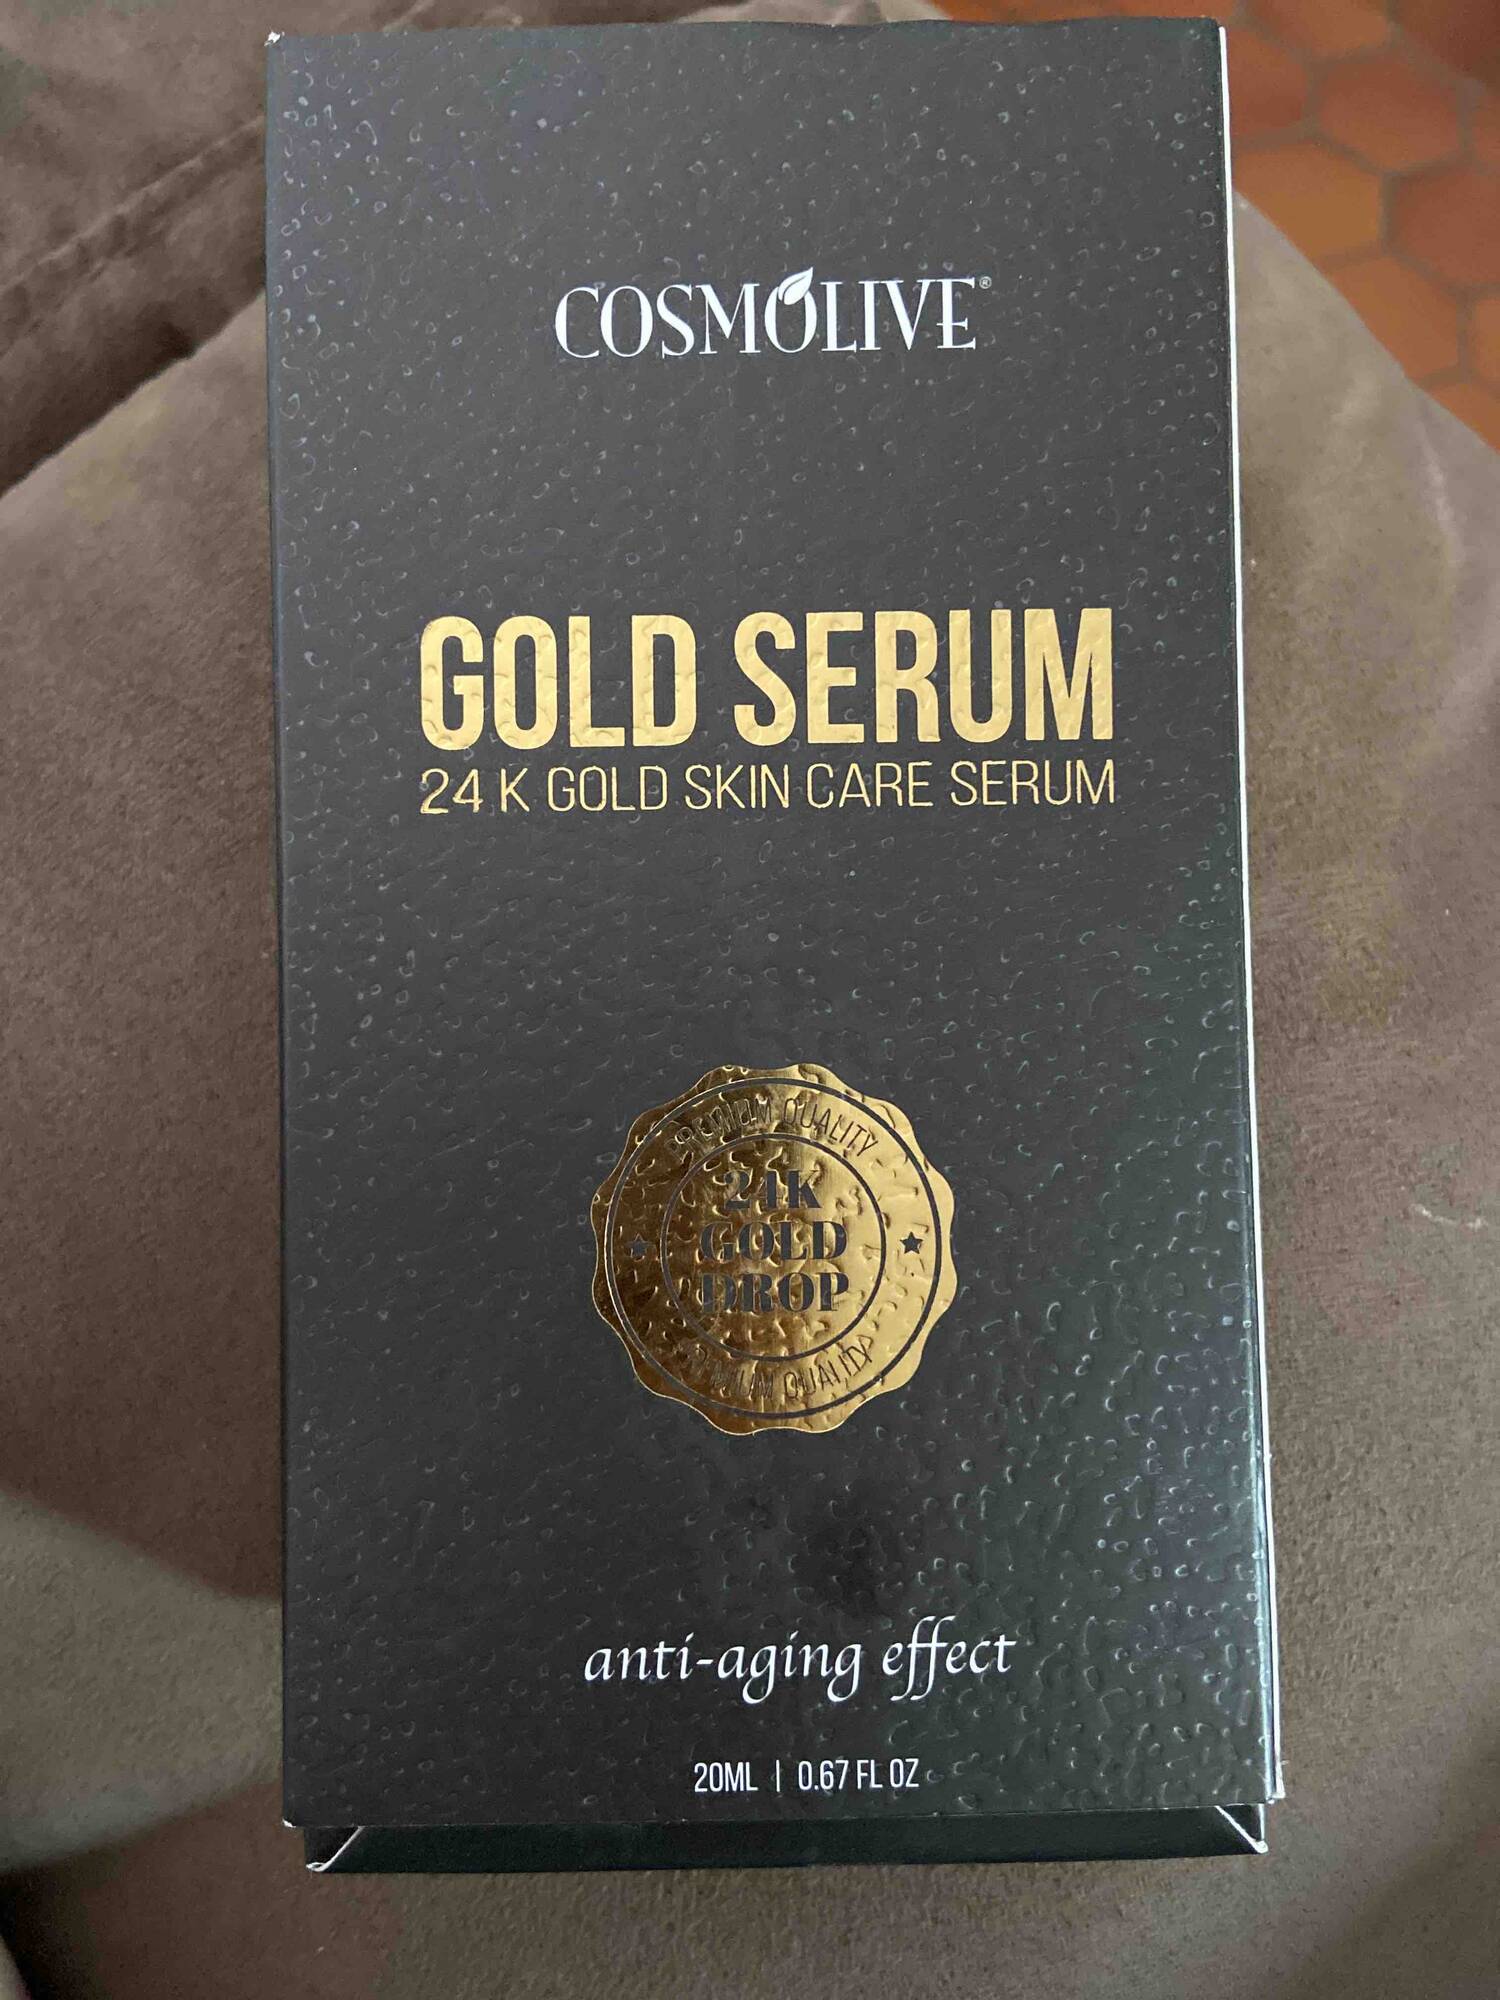 COSMOLIVE - Gold sérum - Anti-aging effect